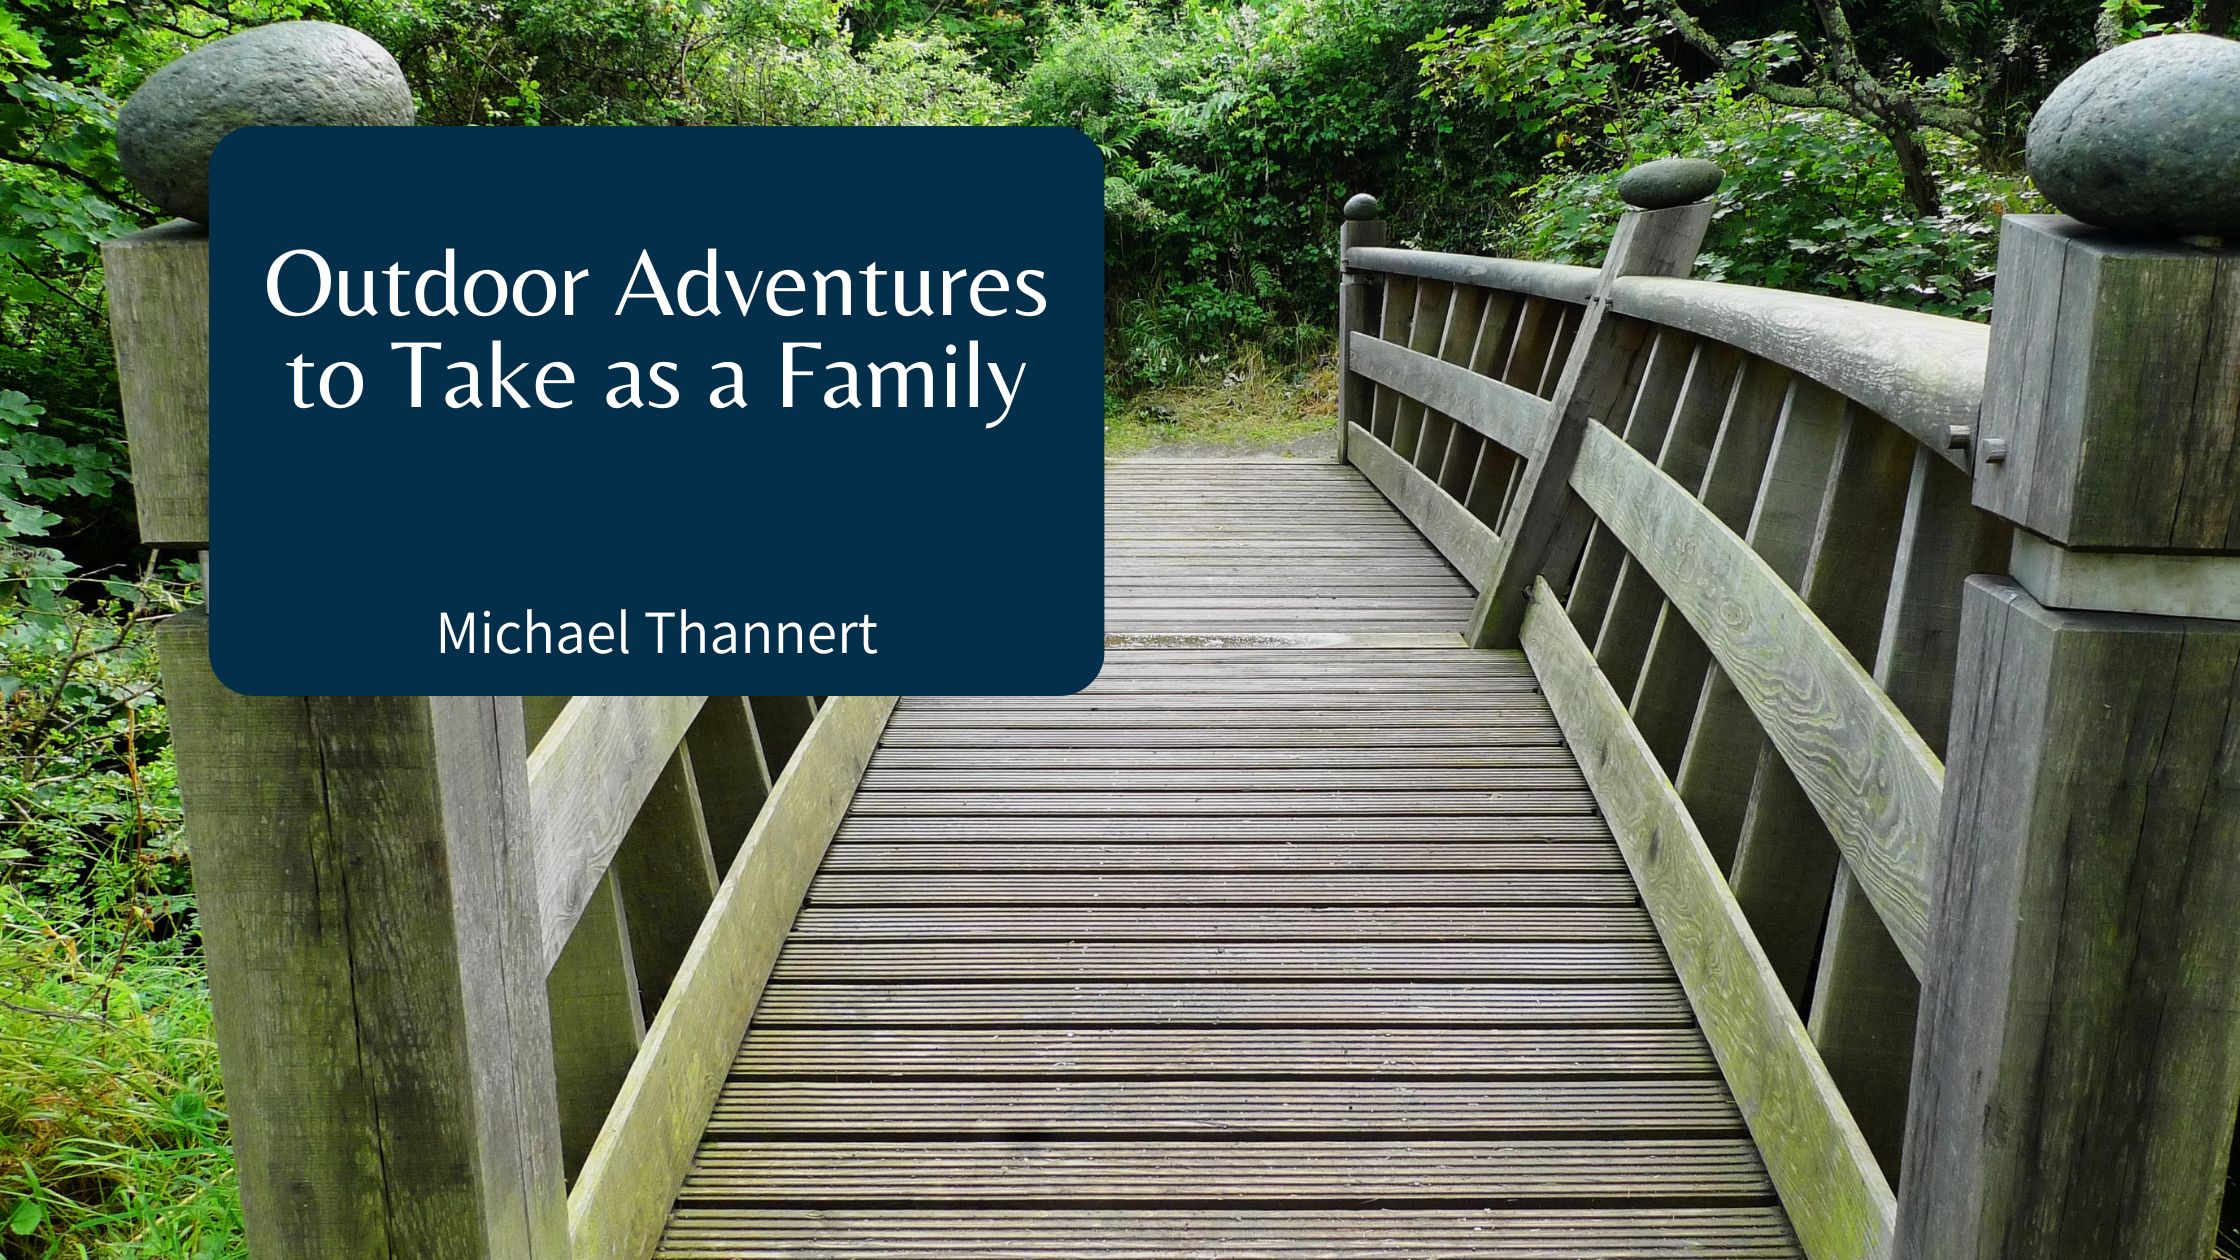 Michael Thannert - Outdoor Adventures to Take as a Family